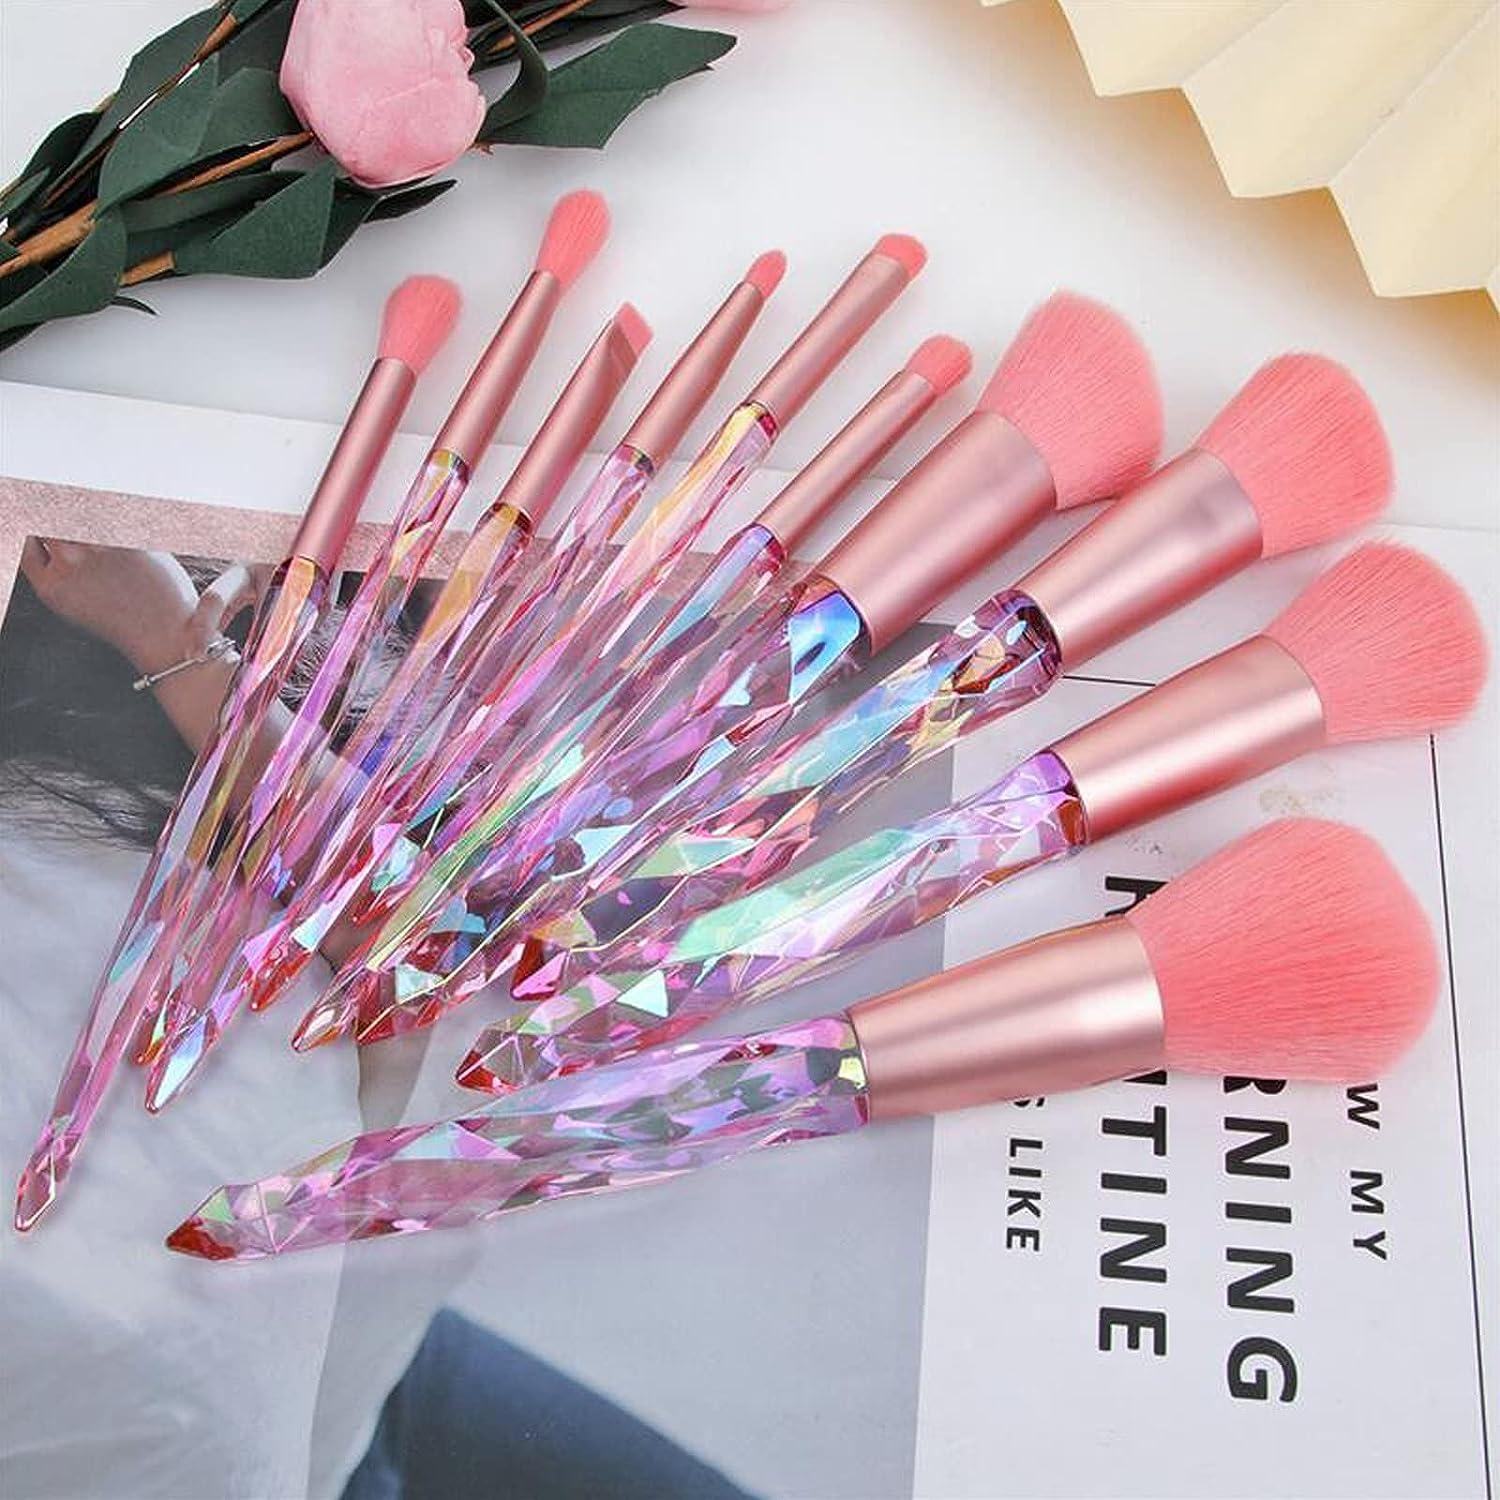 Professional Makeup Brushes 15 Pcs Makeup Brush Set Pink Soft Synthetic  Hairs & Durable Handle for Eyeshadow, Eyebrow, Eyeliner, Blending for Face  